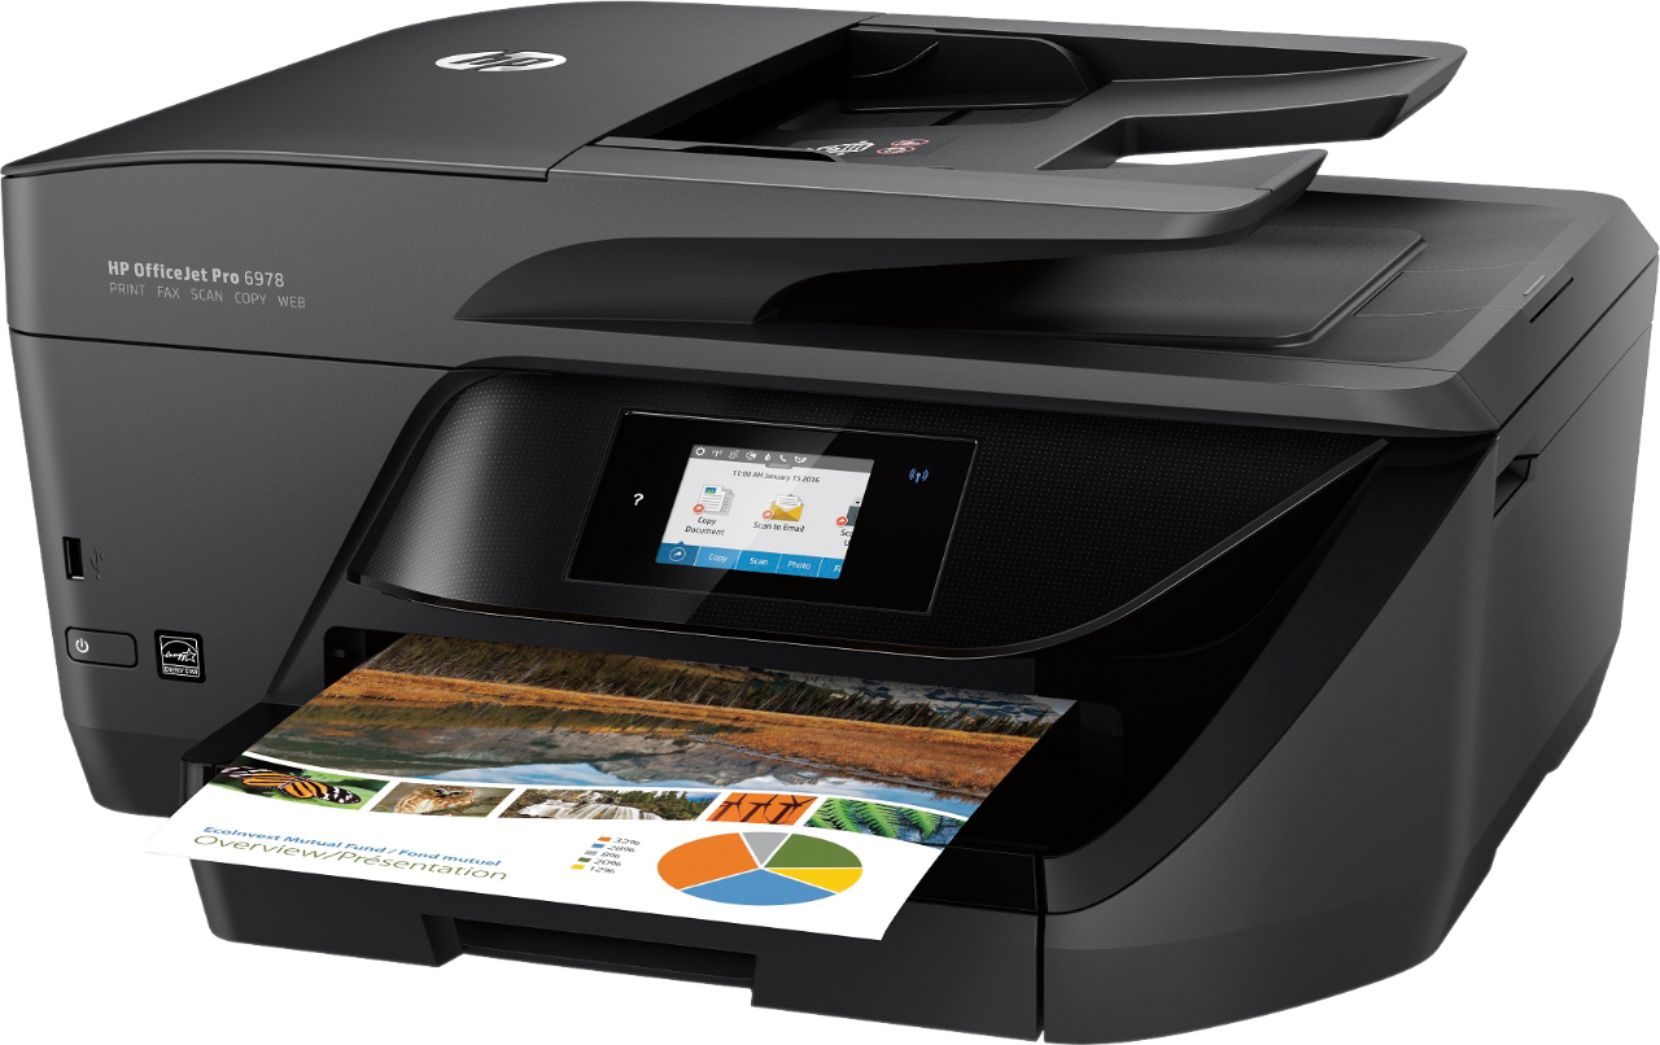 Left View: HP - OfficeJet Pro 6978 Wireless All-In-One Instant Ink Ready Printer - Black